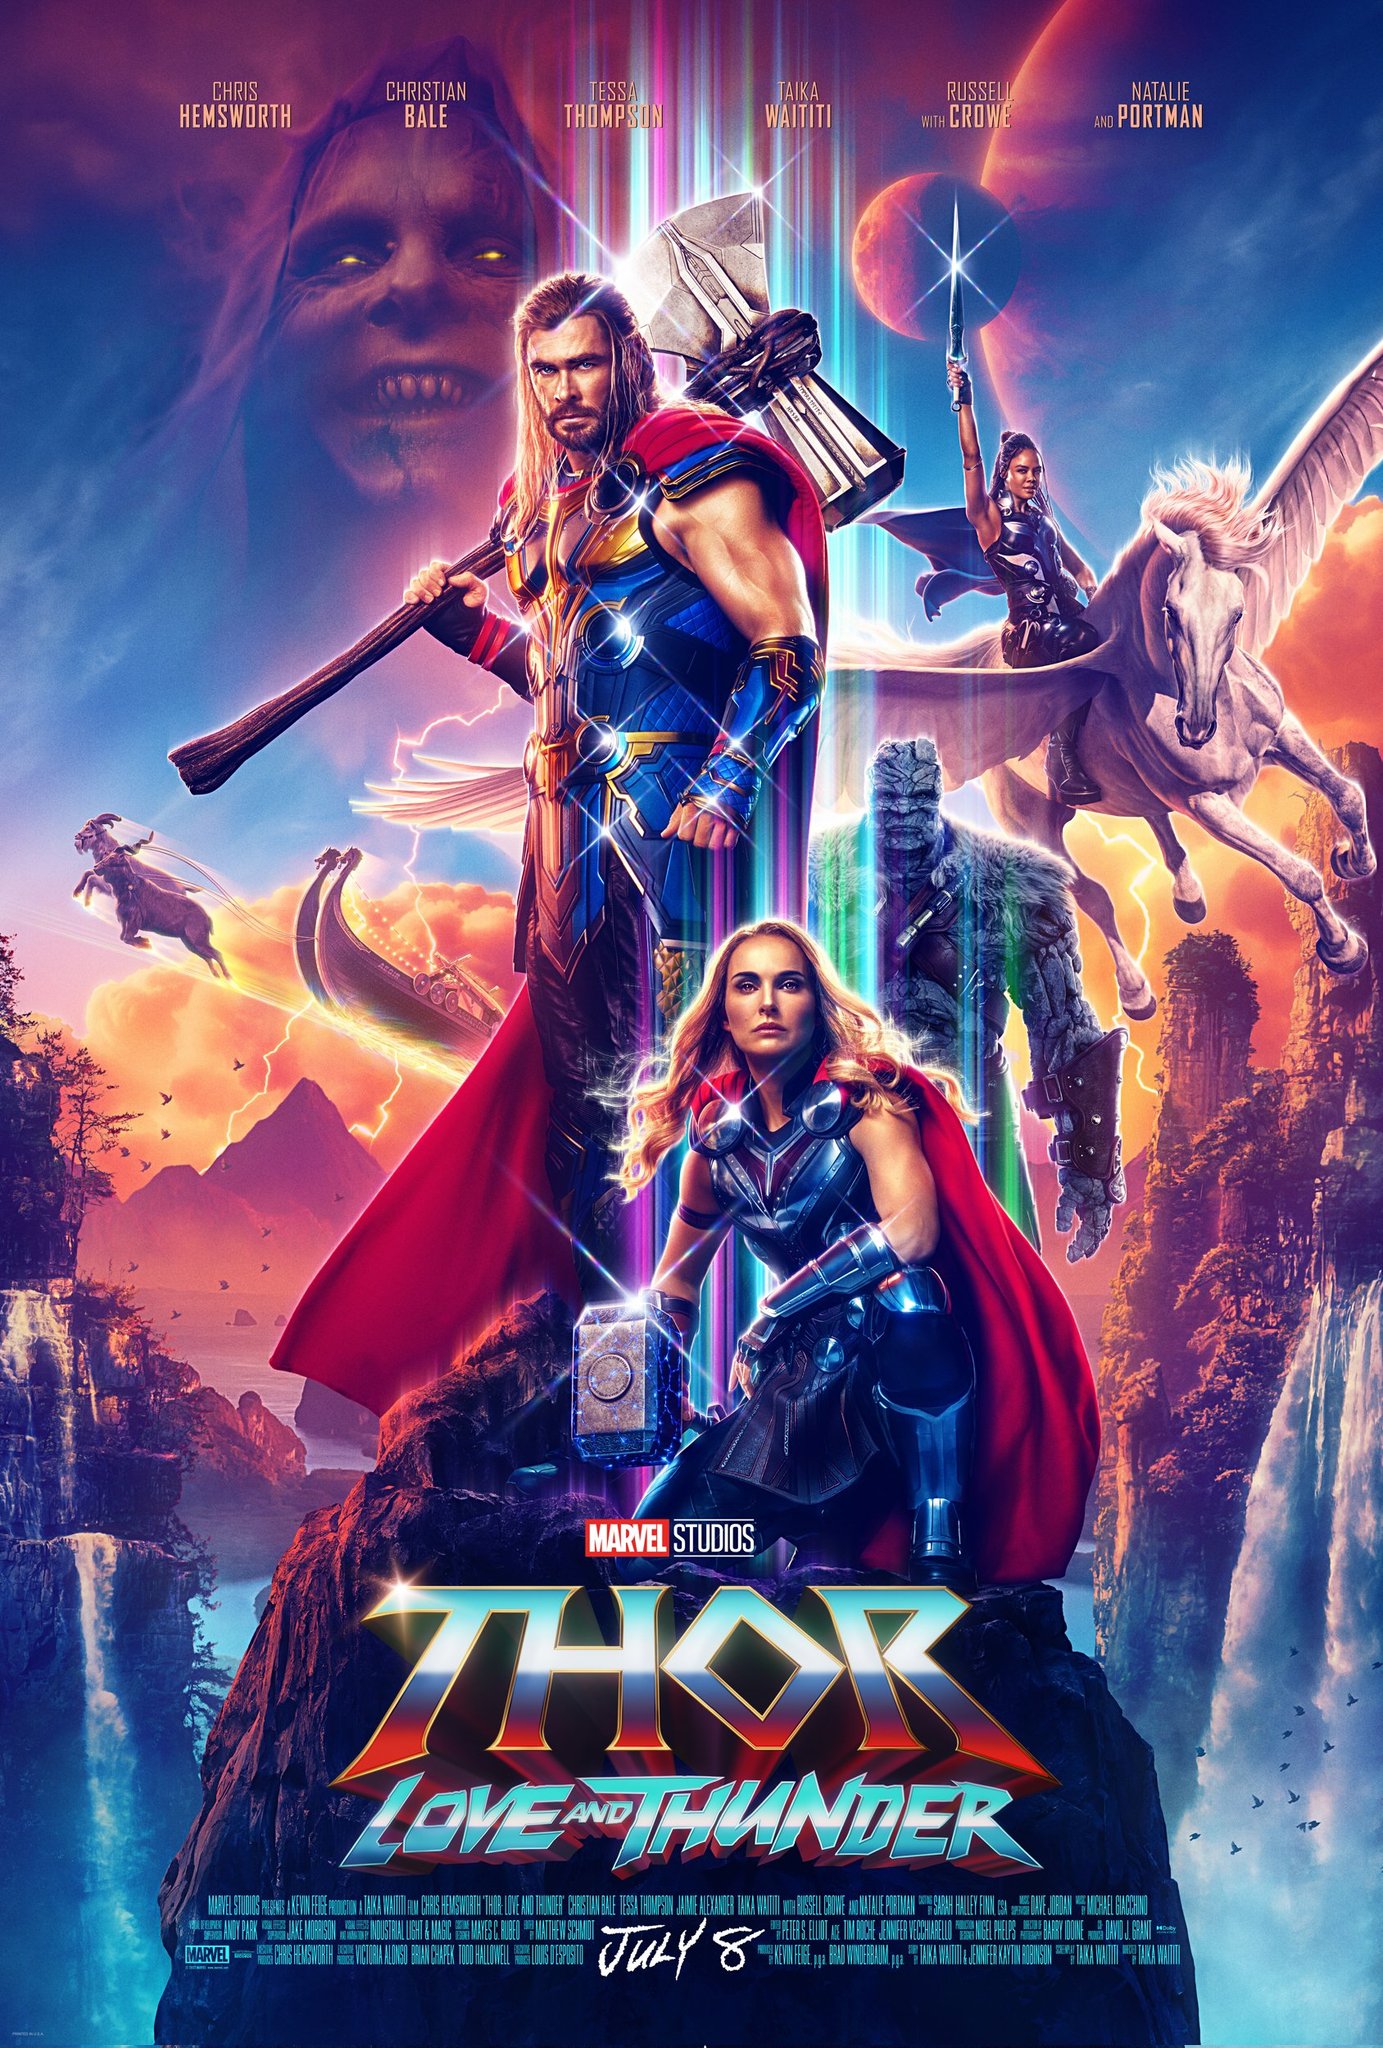 poster of "Thor: Love and Thunder".  (Marvel Studios)